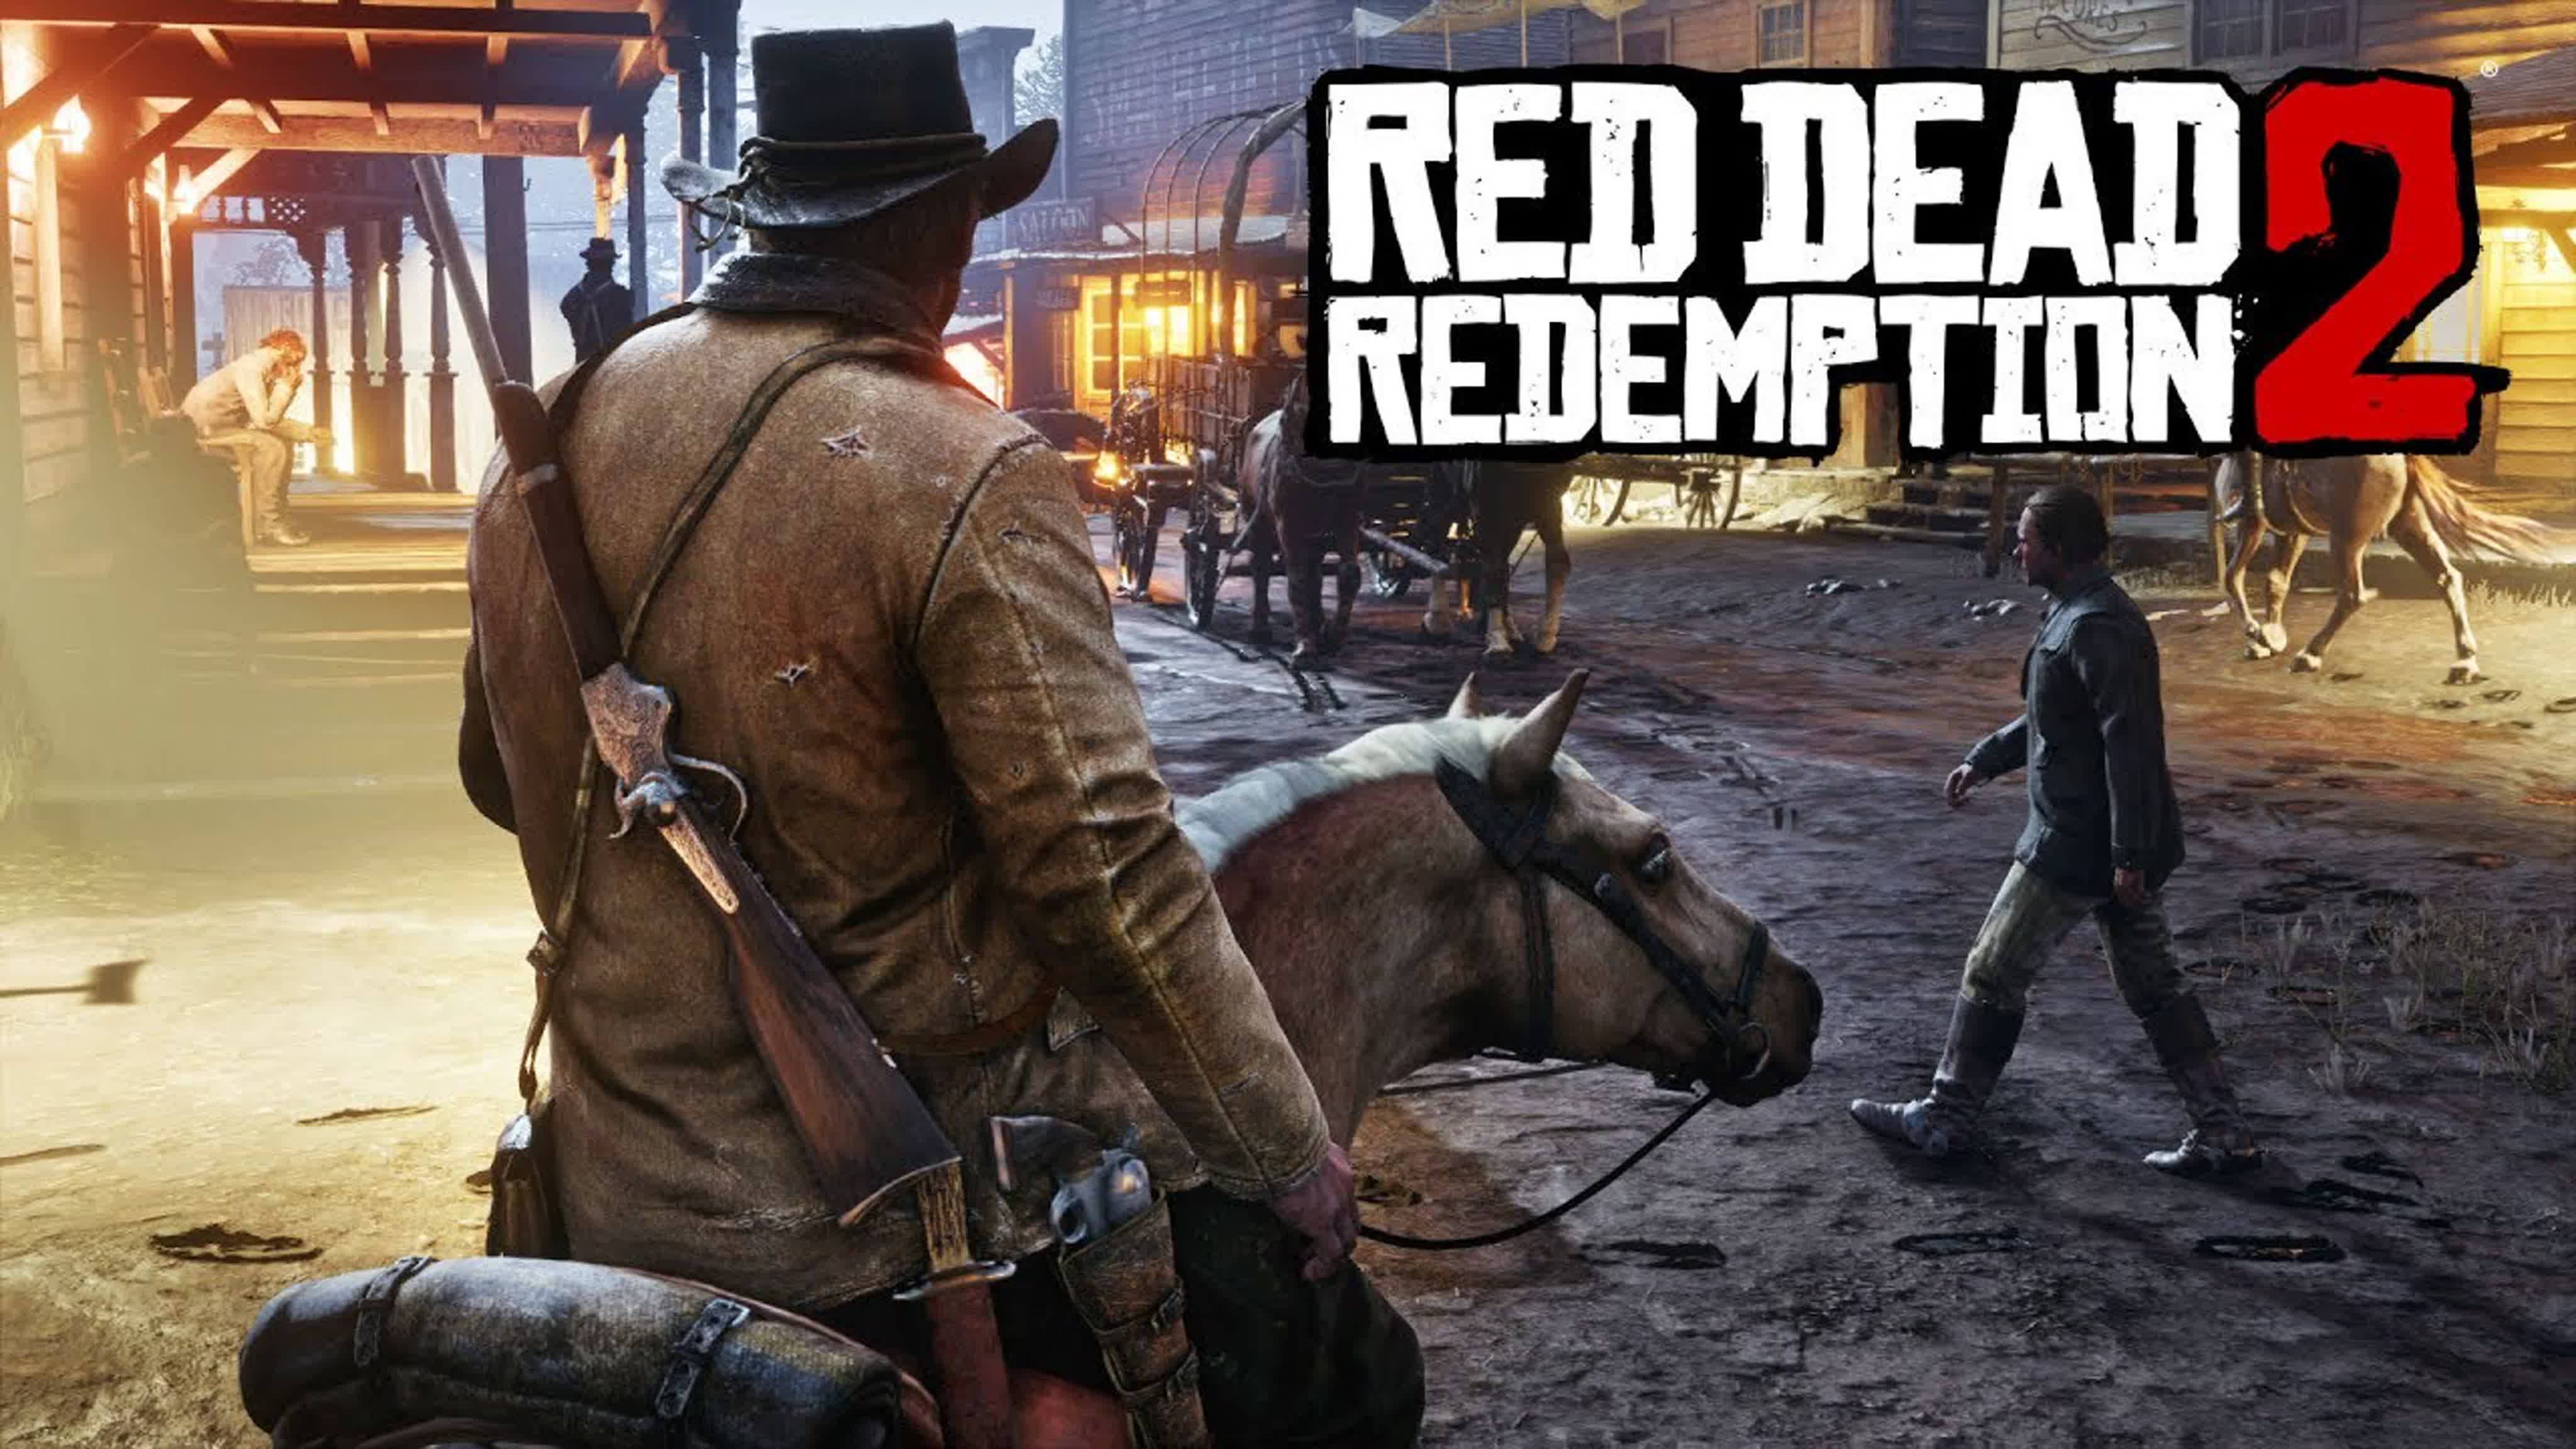 Rdr ps3. Rdr 2 ps4. Red Dead Redemption 2 на пс4. Ред дед редемпшен 2 ps4. Red Dead Redemption 2 стрим.